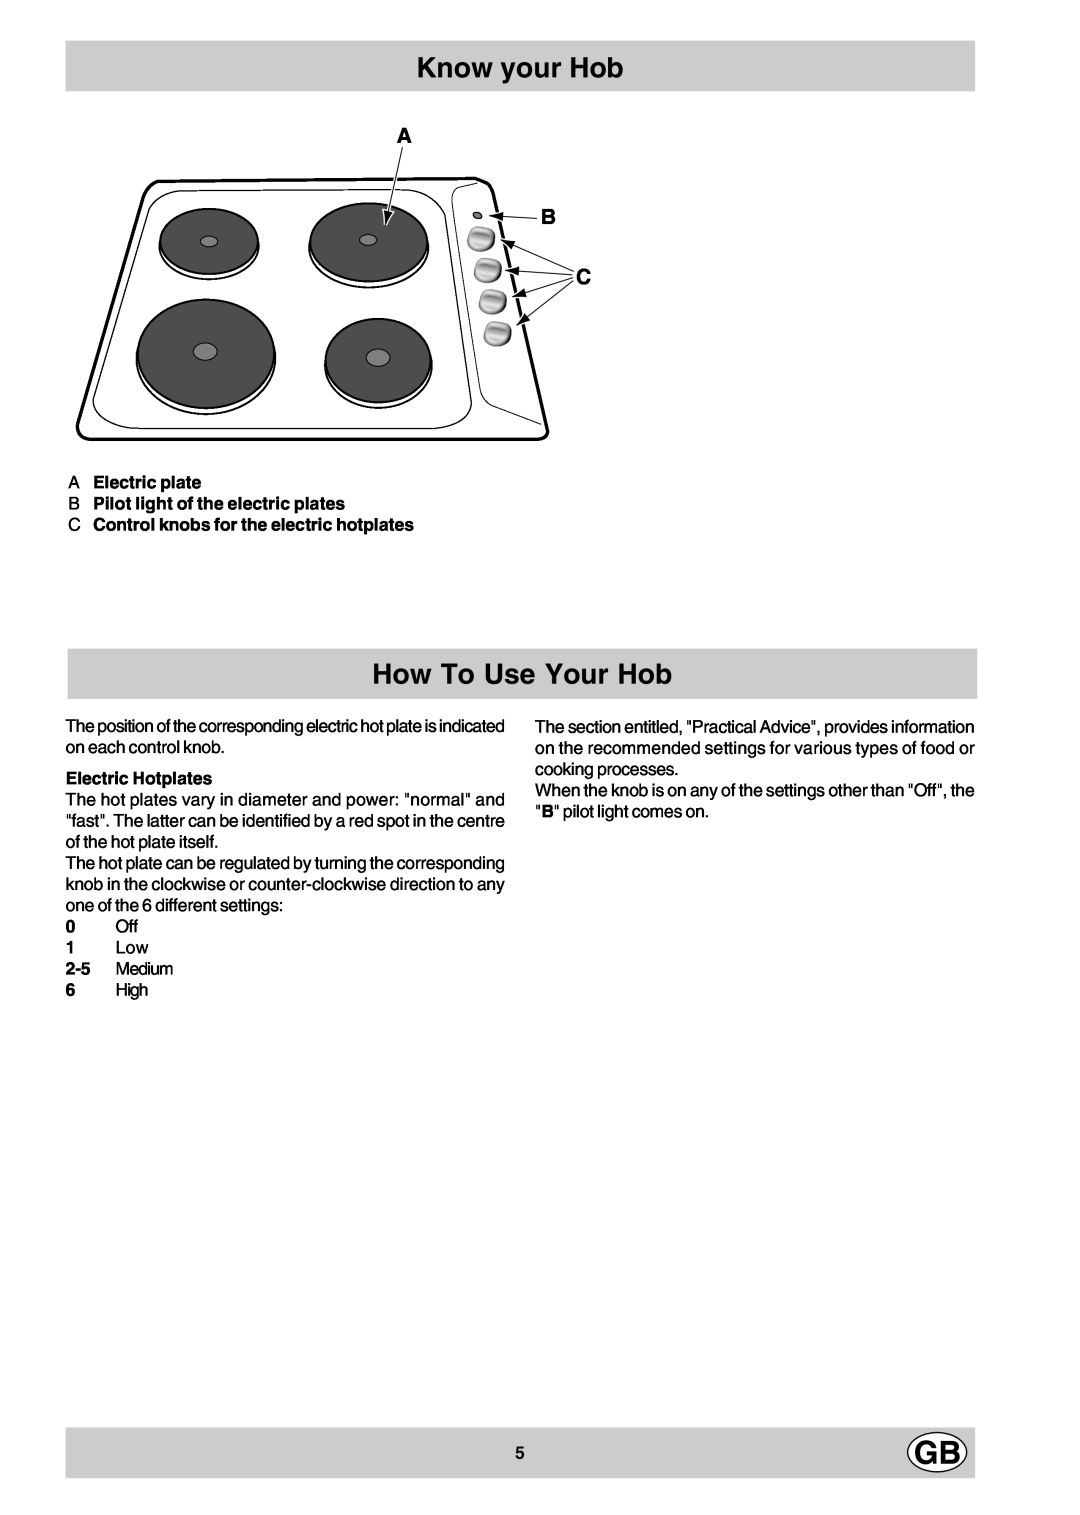 Hotpoint E604 manual Know your Hob, How To Use Your Hob, A B C, A Electric plate B Pilot light of the electric plates 